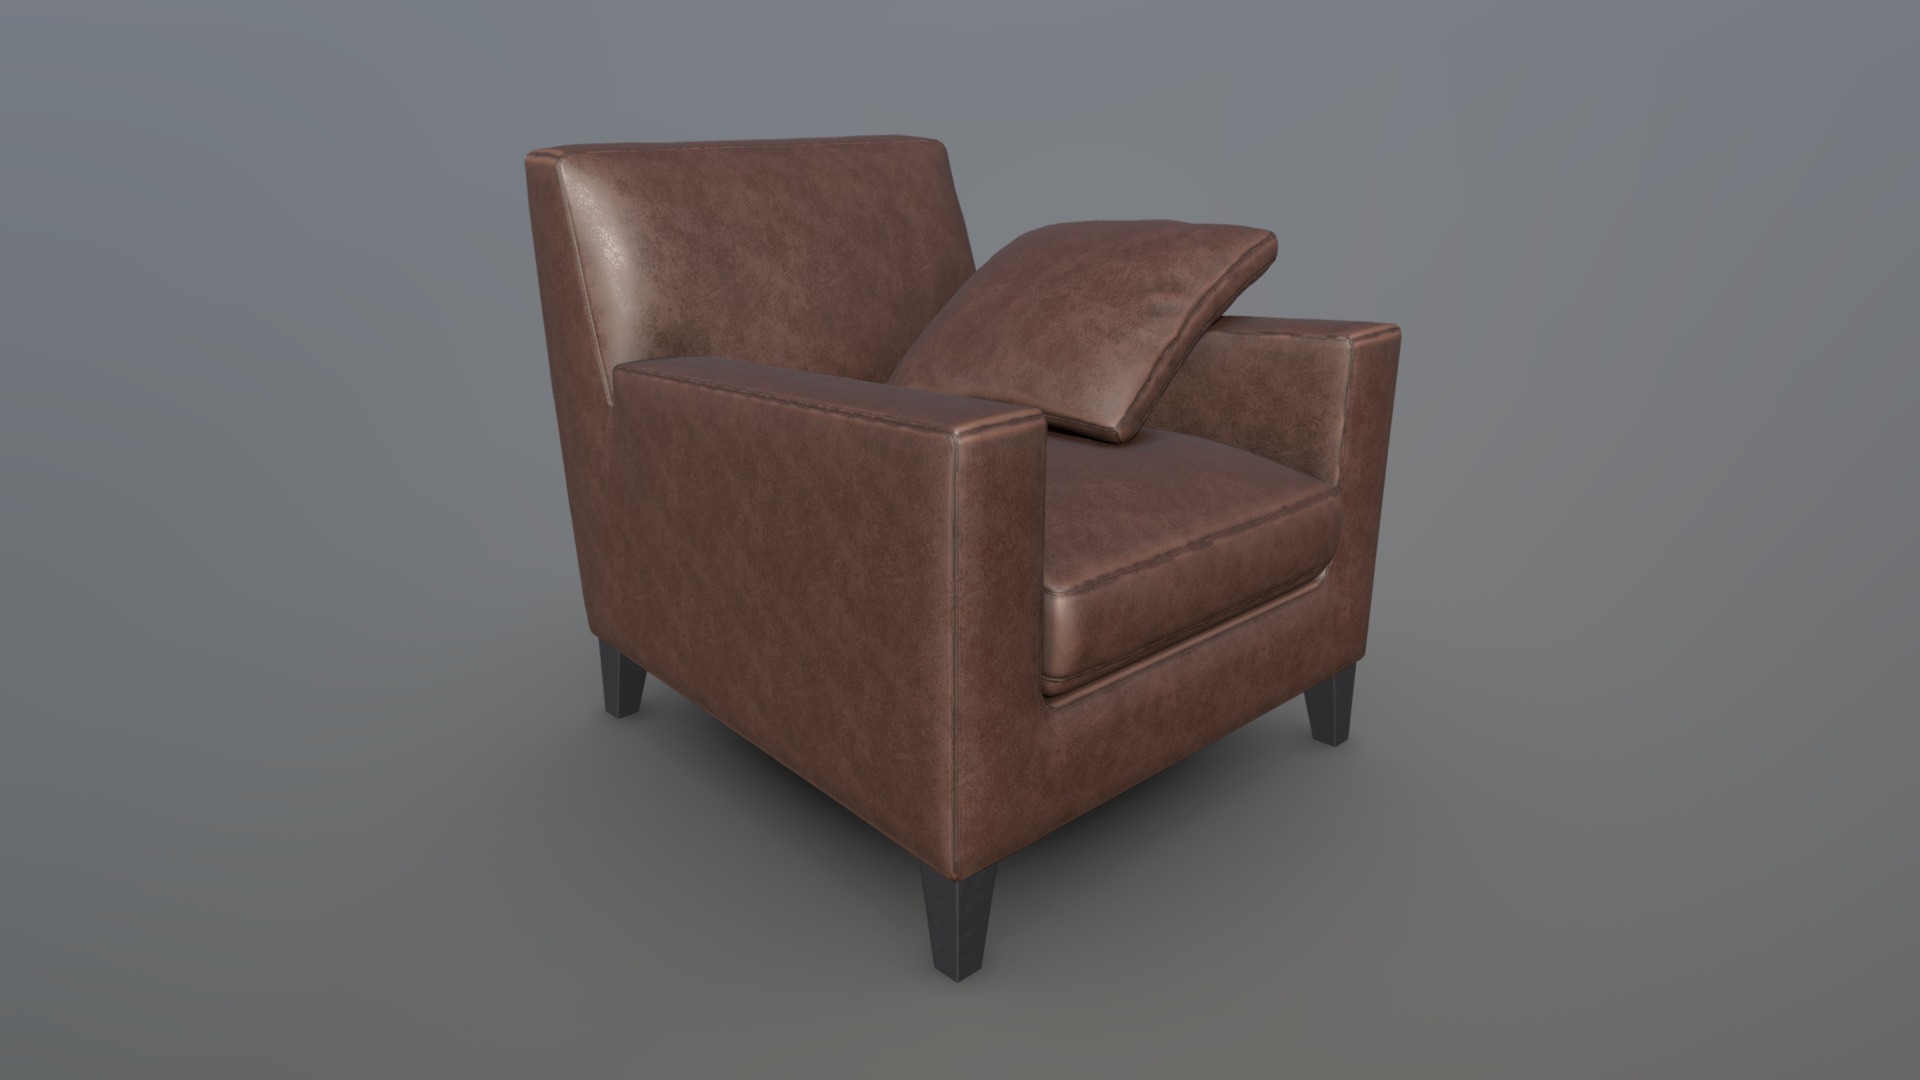 3D model Leather _Sofa_USDZ_GLTF - This is a 3D model of the Leather _Sofa_USDZ_GLTF. The 3D model is about a brown chair with a cushion.